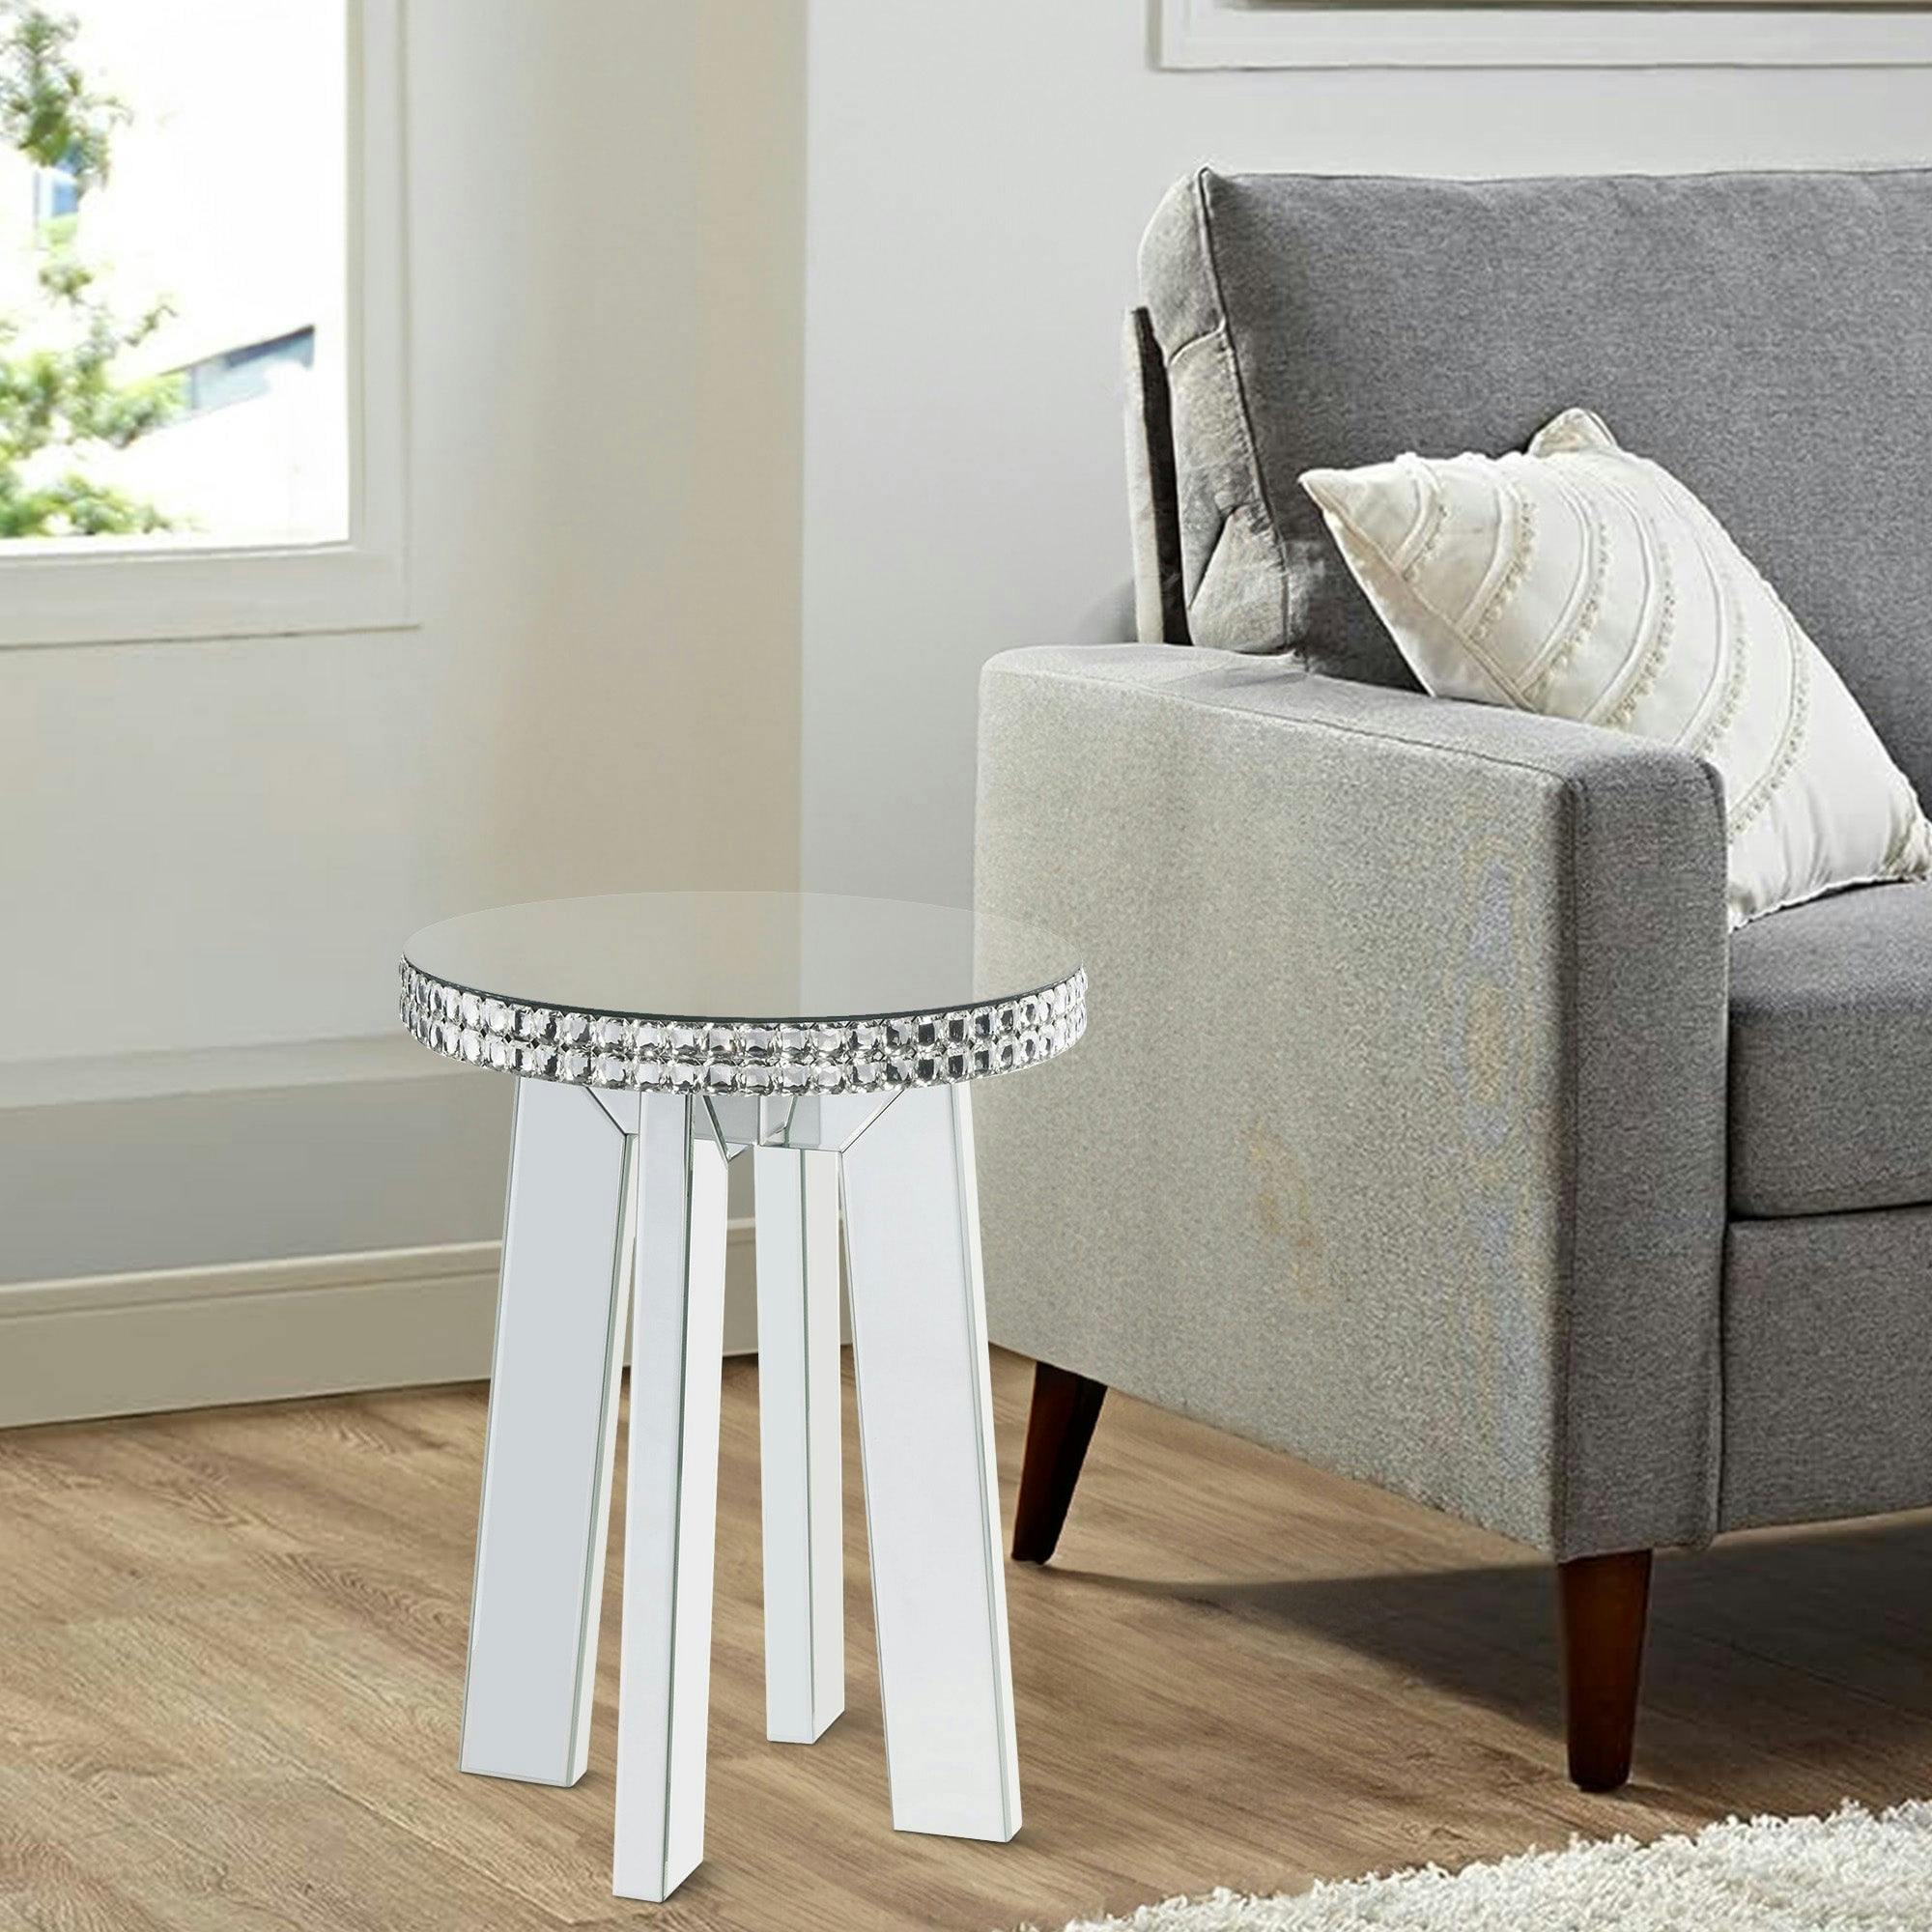 Elegant Round Mirrored End Table with Faux Crystal Accents